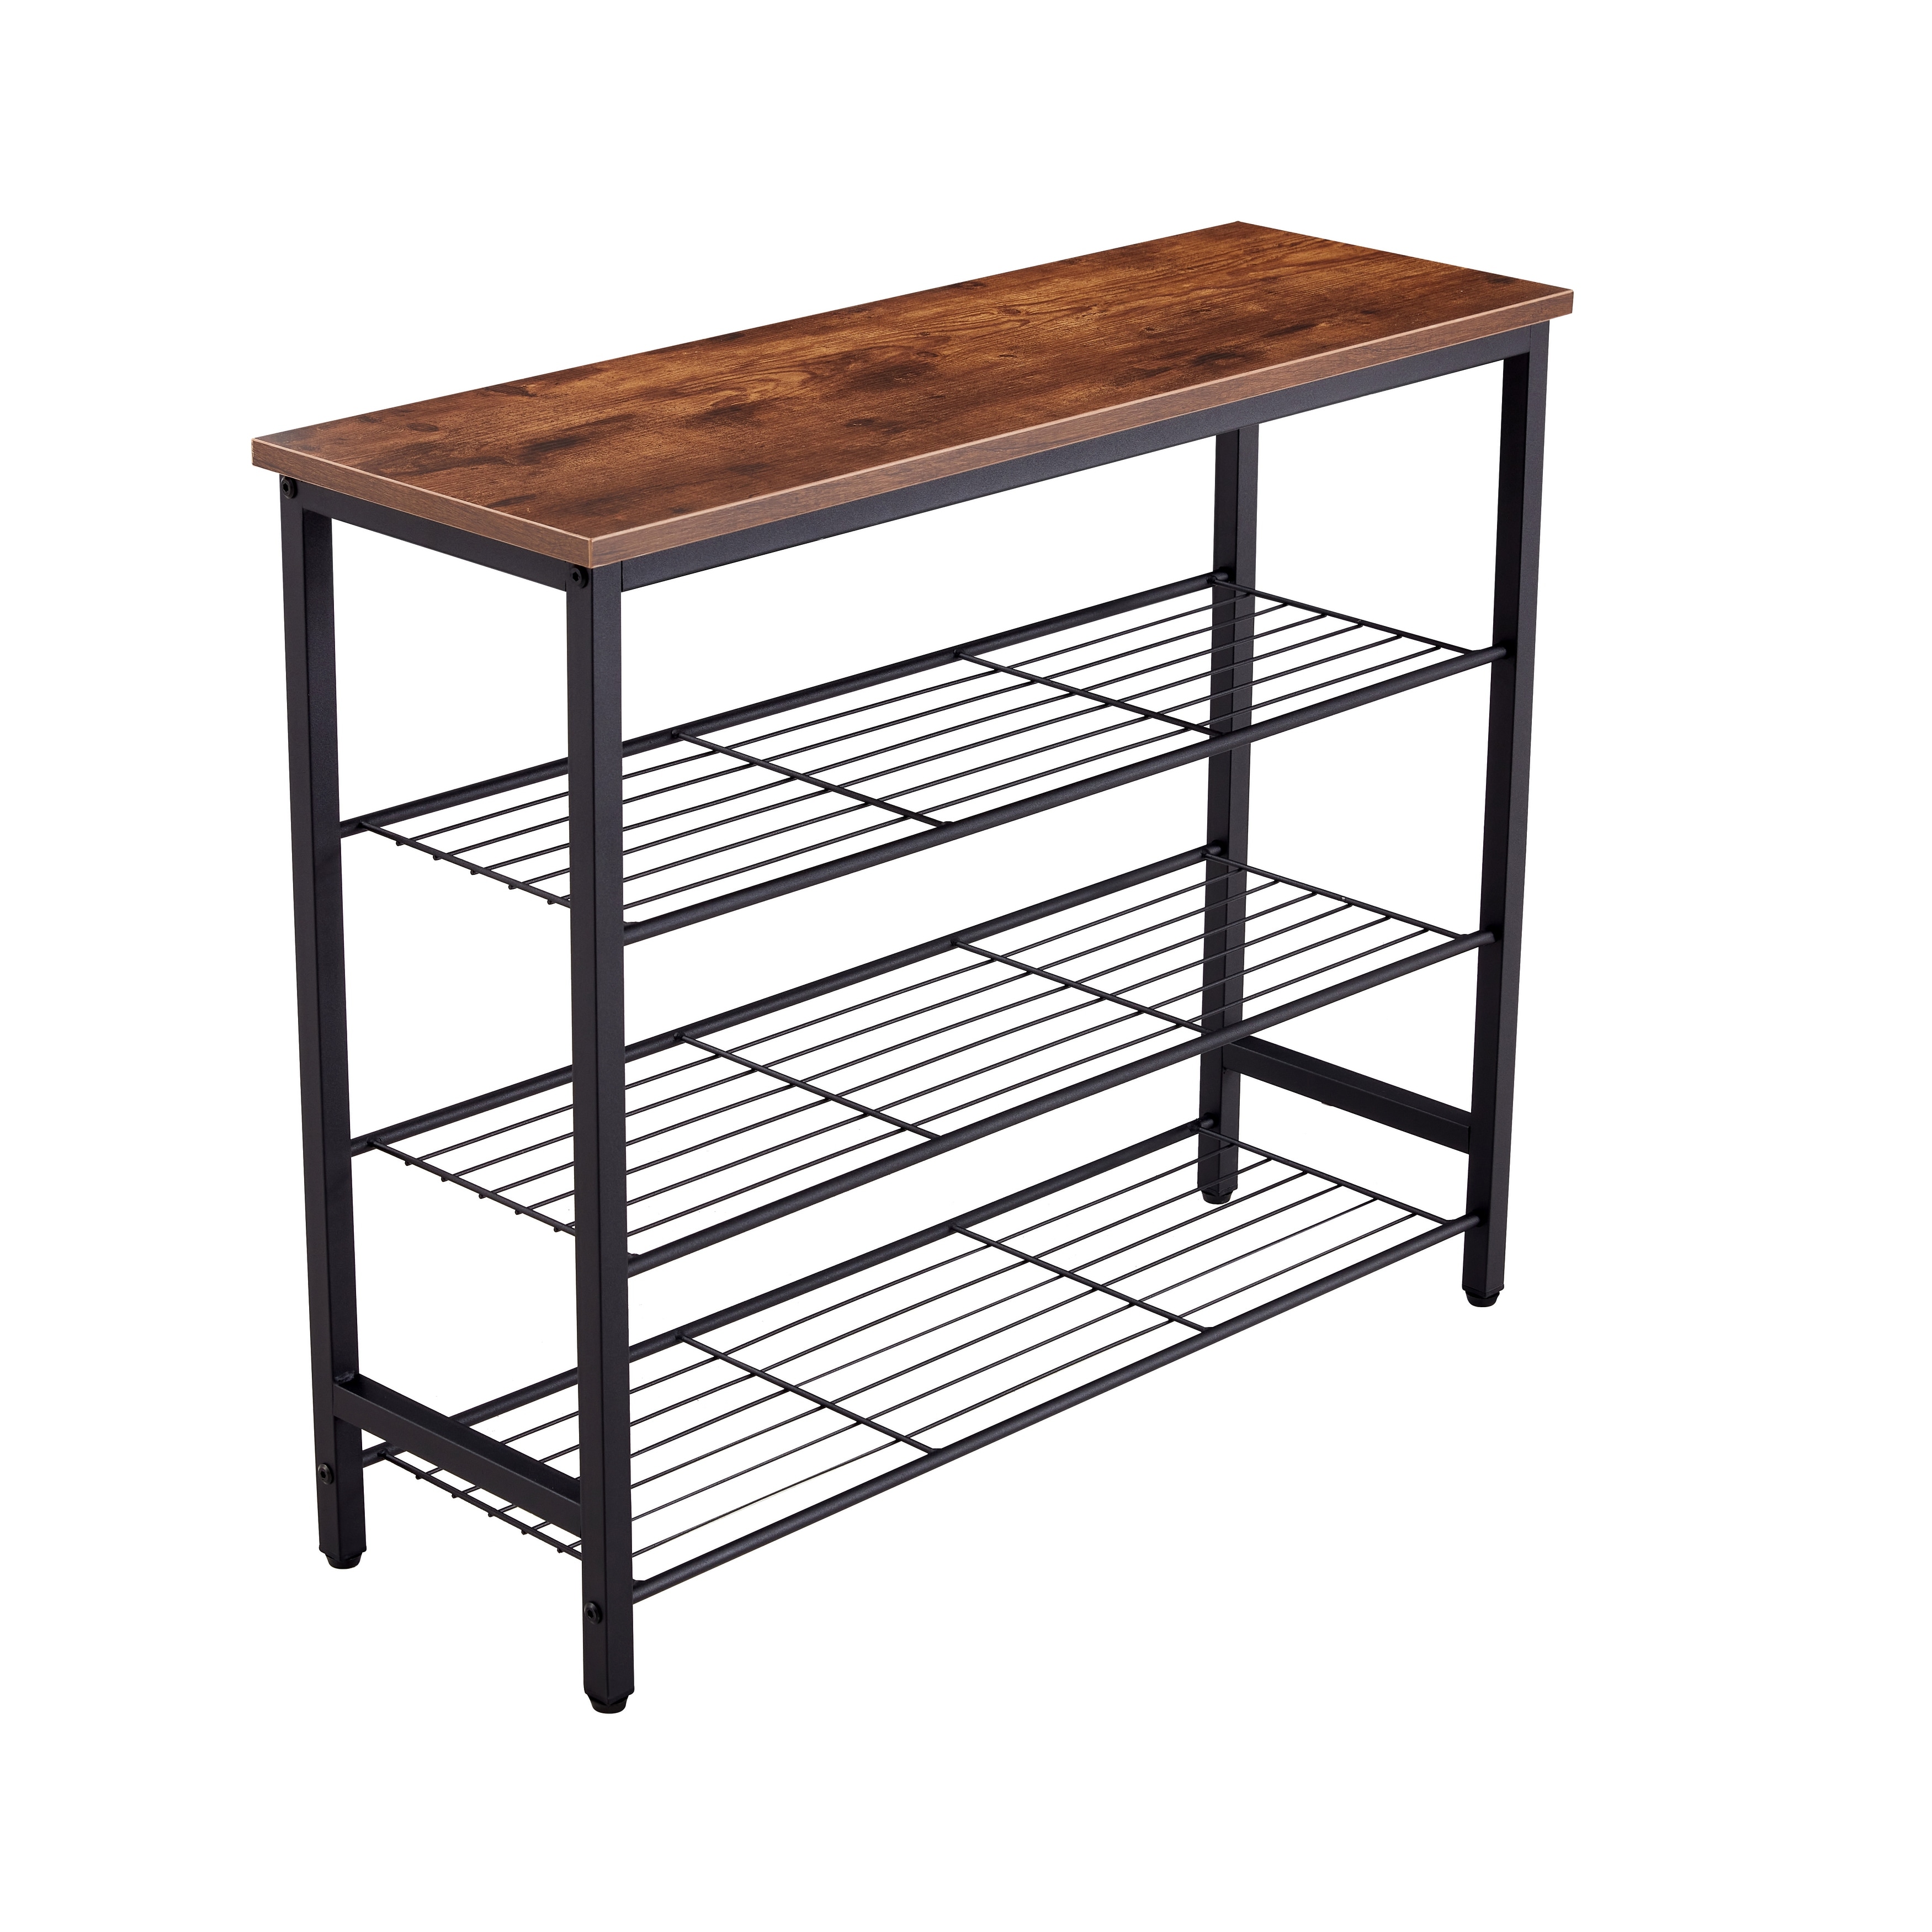 https://ak1.ostkcdn.com/images/products/is/images/direct/6ba2ba469e0fa68a372644d22d99c3be1c5ba14a/DN-4-Tier-Metal-Shoe-Rack%2C-Modern-Multifunctional-Shoe-Storage-Shelf-with-MDF-Top-Board%2C-1-pc-per-carton.jpg